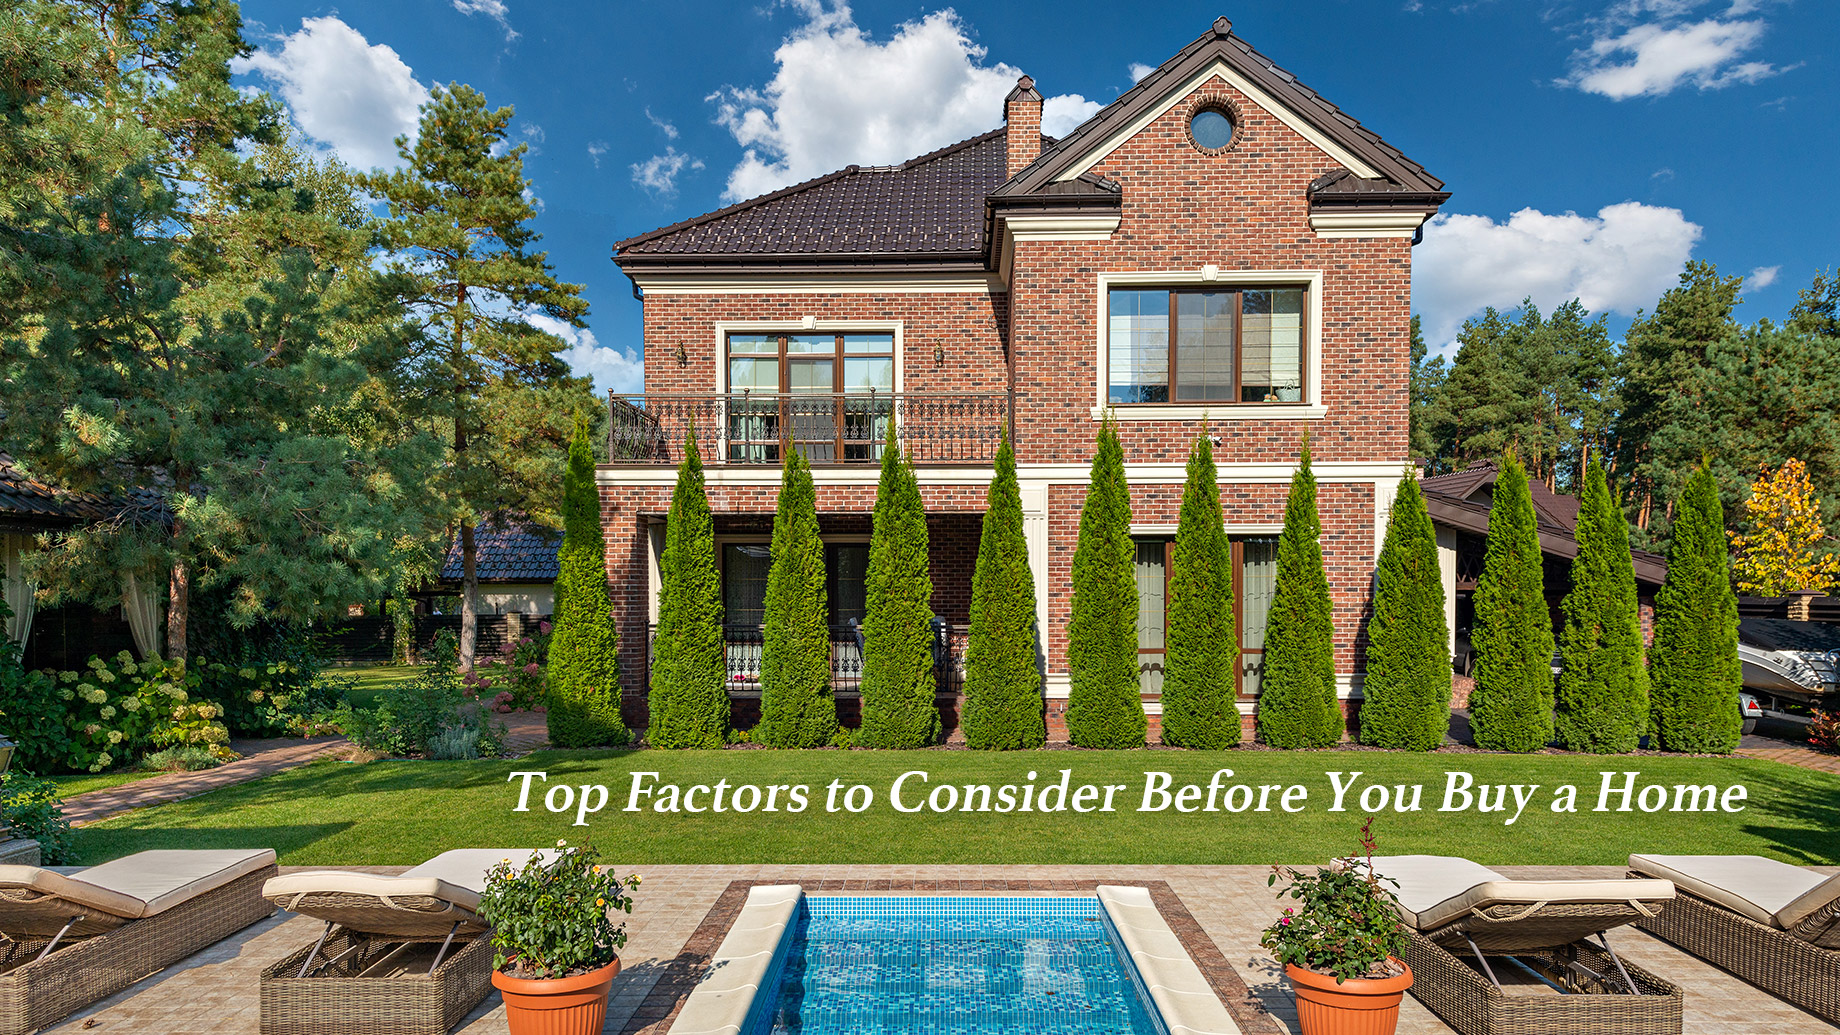 Top Factors to Consider Before You Buy a Home